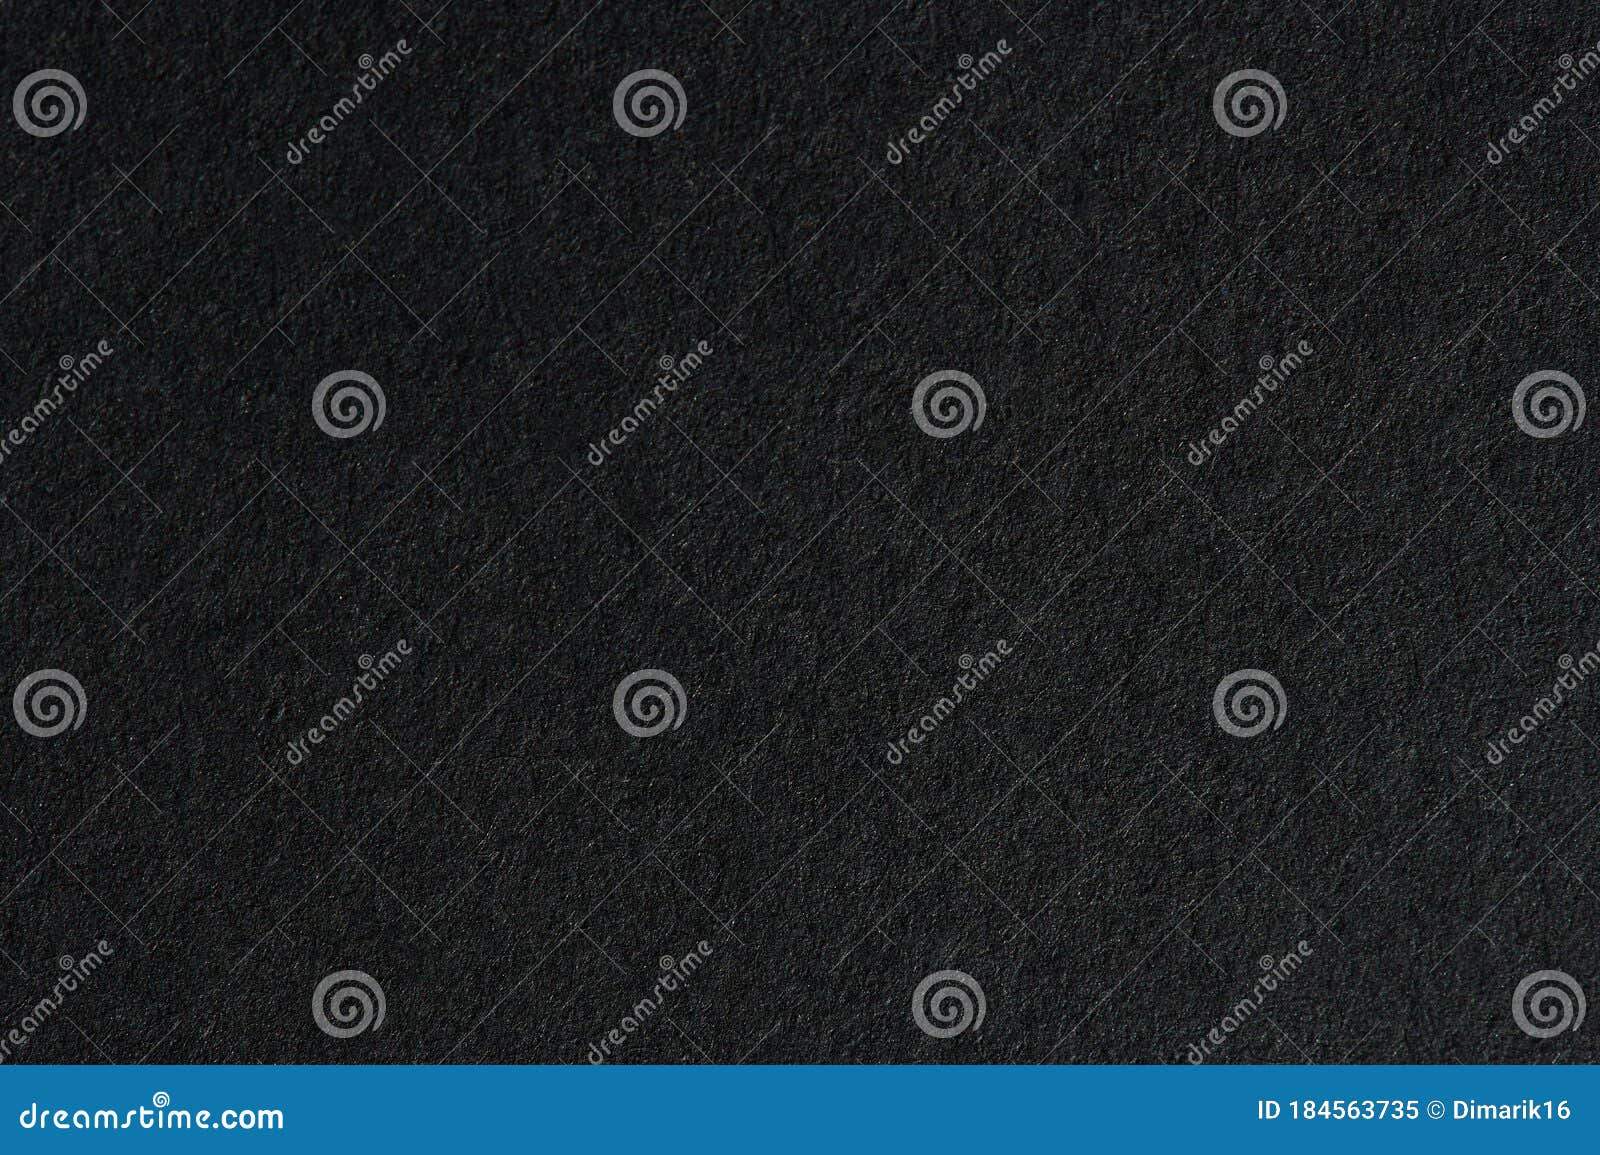 Black Paper Texture Background Stock Image - Image of black, page ...